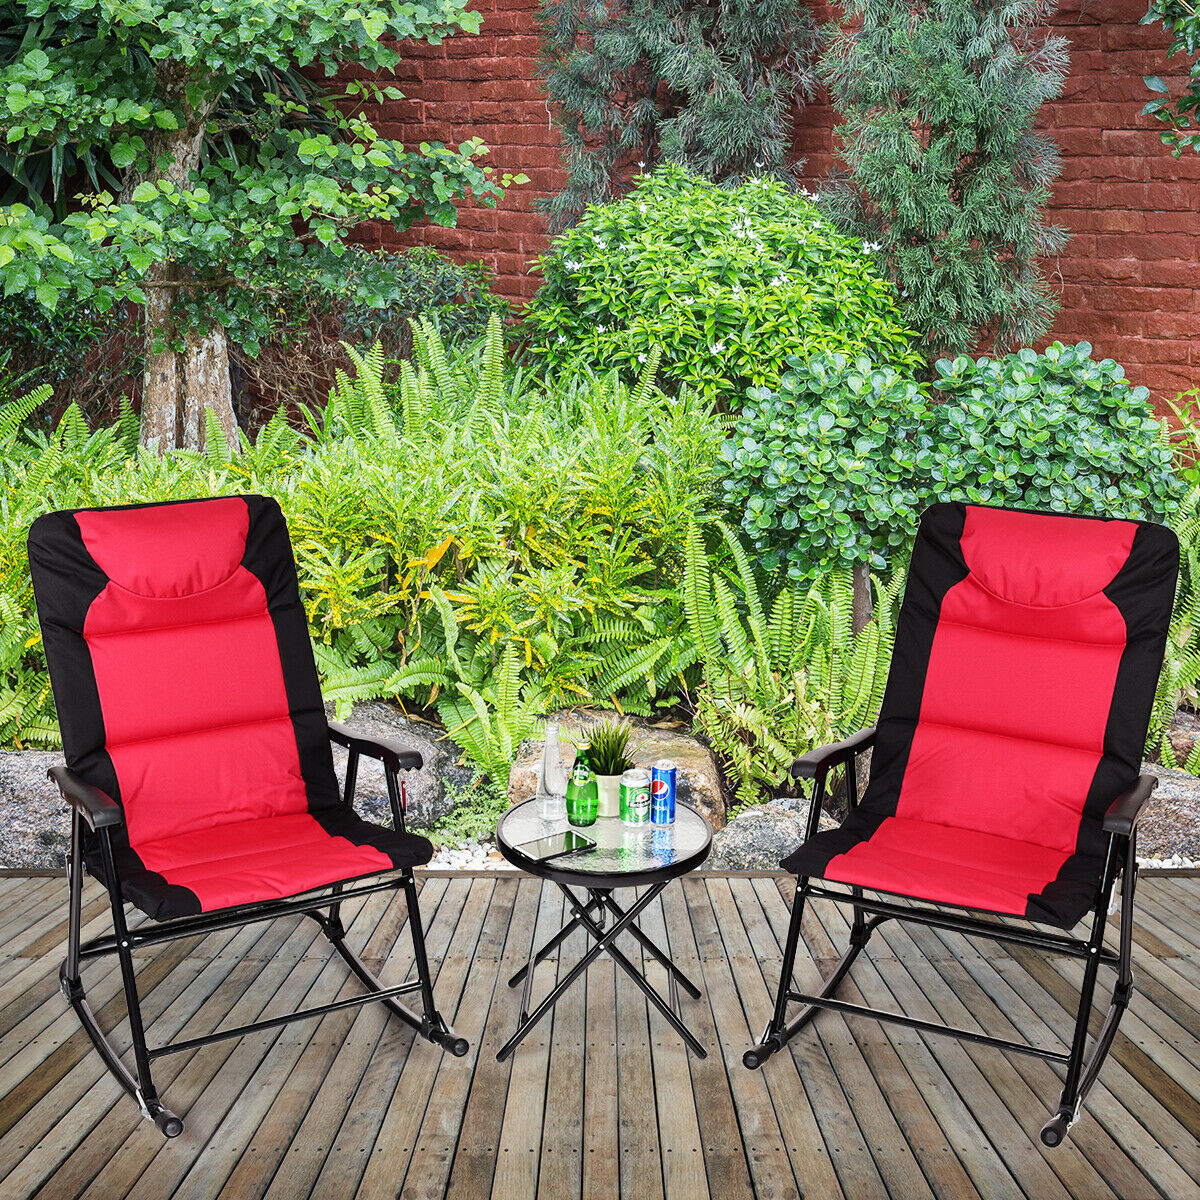 3 Pcs Folding Bistro Set Outdoor Rocking Chairs and Table Set-Red